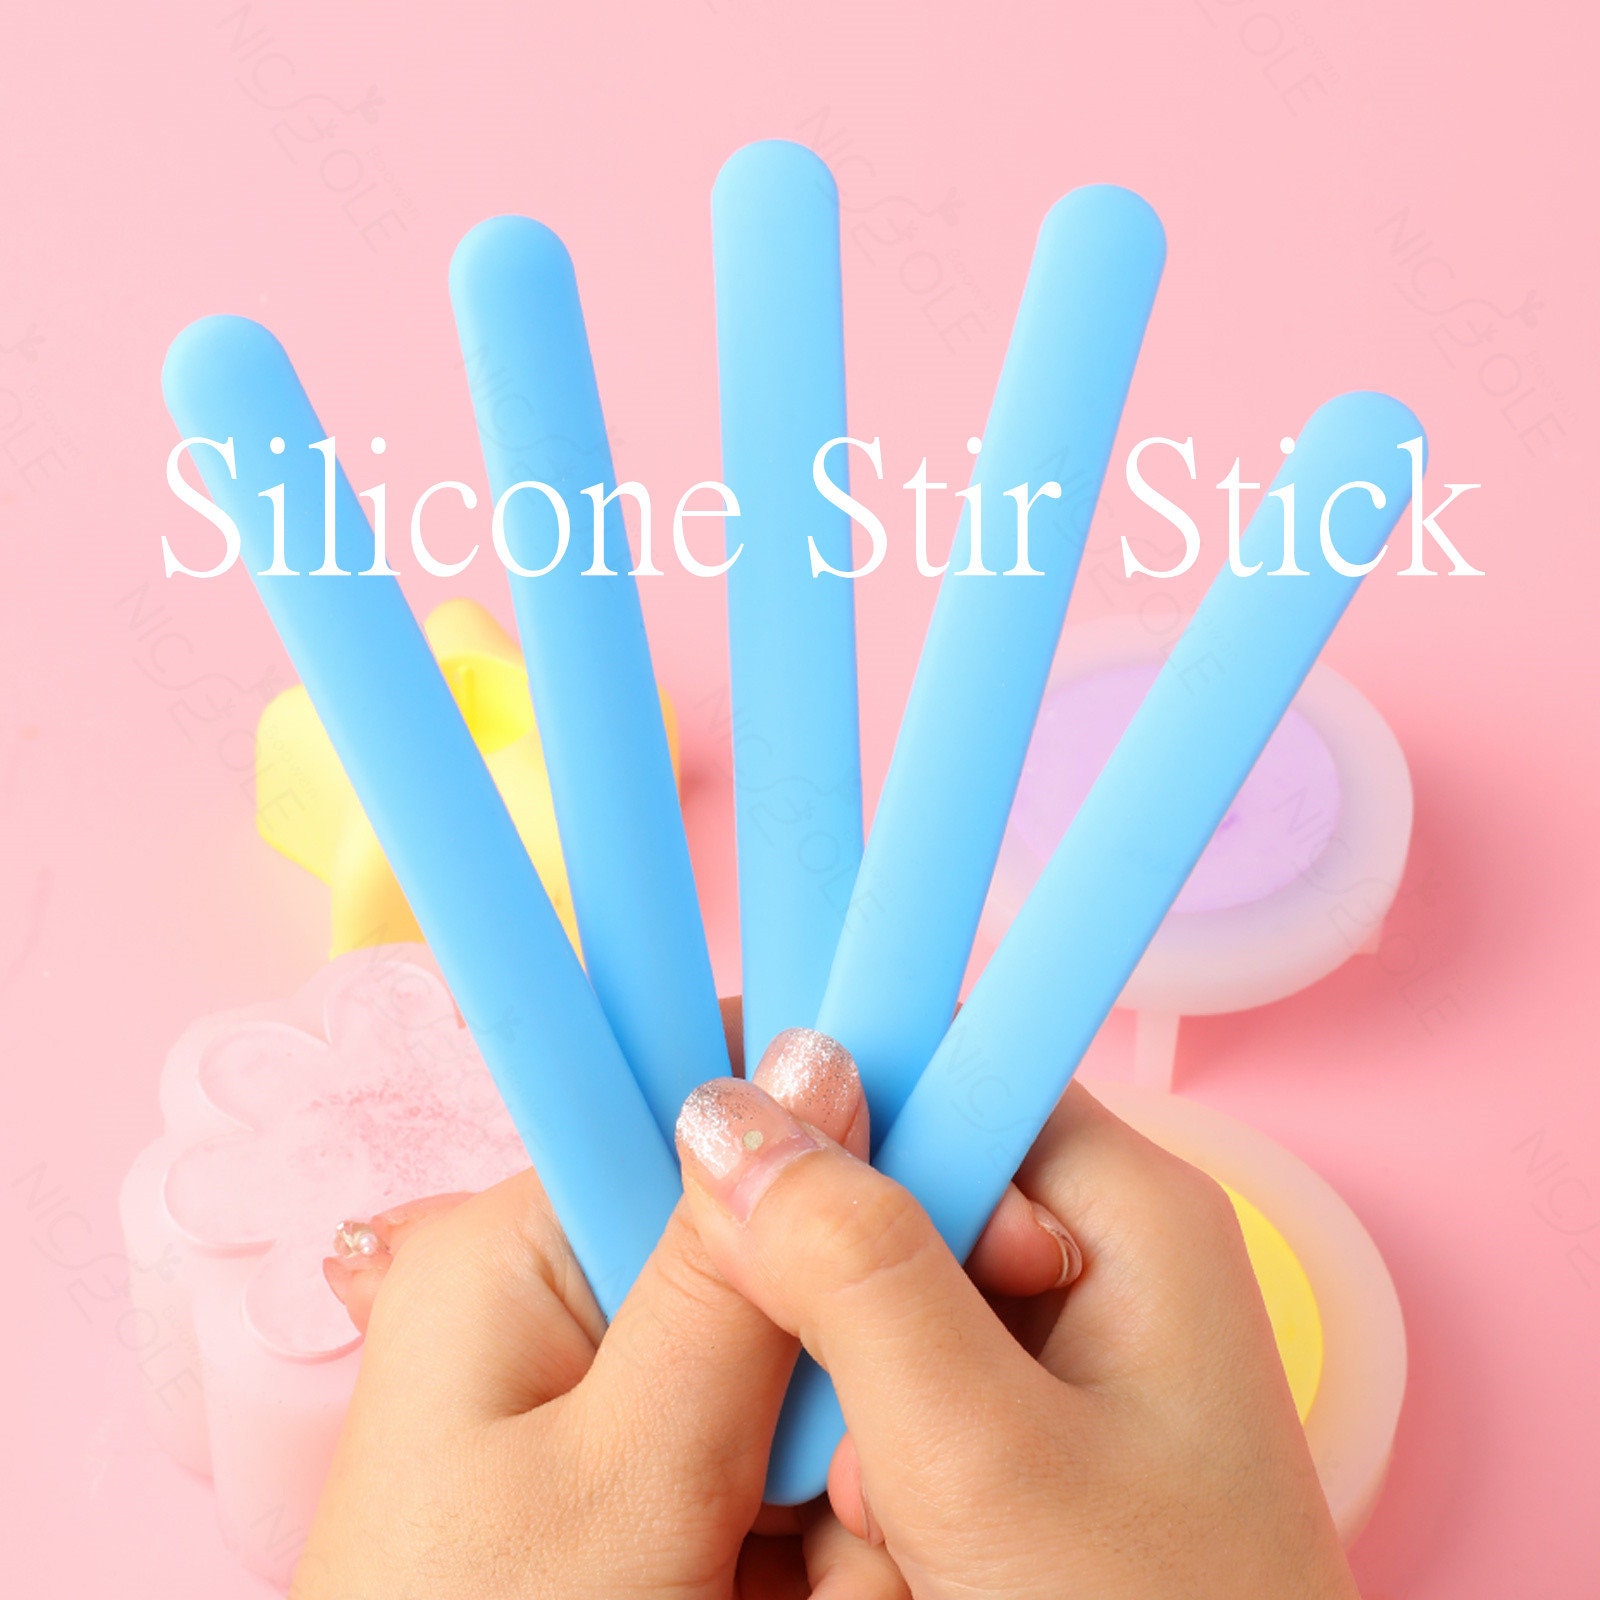 Resin Tools Set 22pcs, A3 Silicone Sheet, 100 ml Measuring Cups, Silicone  Mixing Cups, Silicone Brushes Stir Sticks Spoons, Pipette for Epoxy Resin